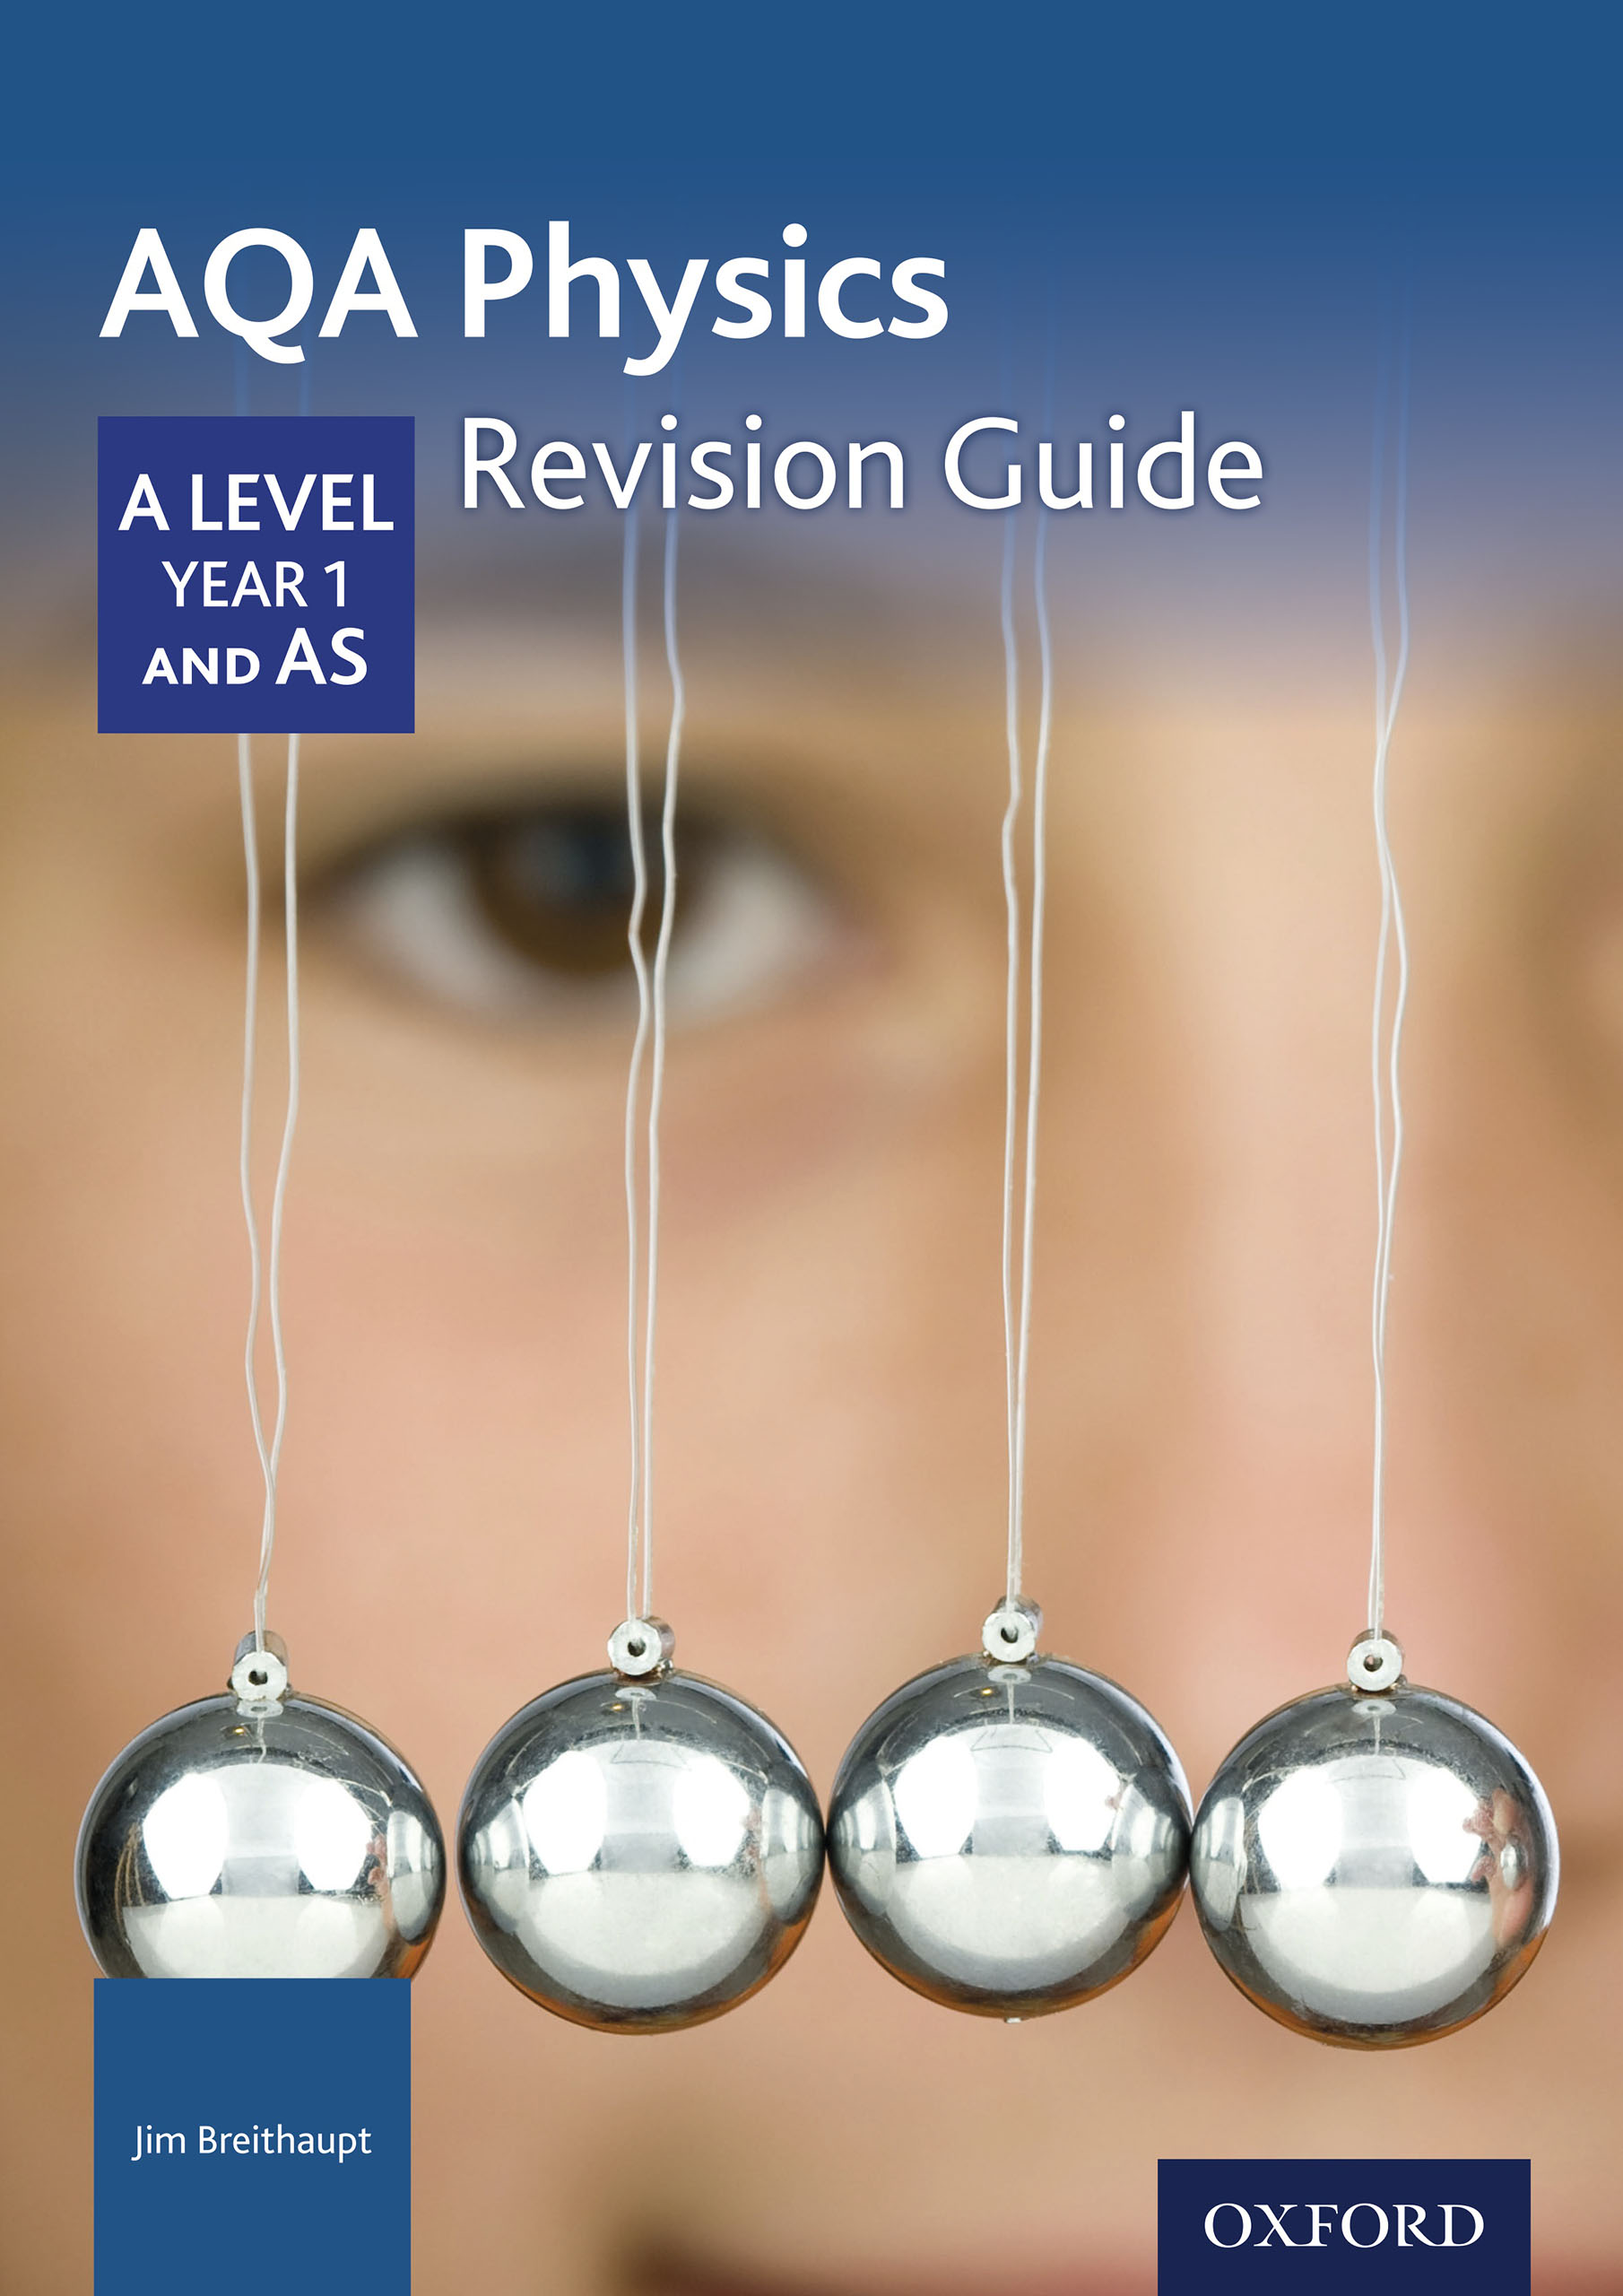 AQA Physics (revision guide) A level, year 1 and AS